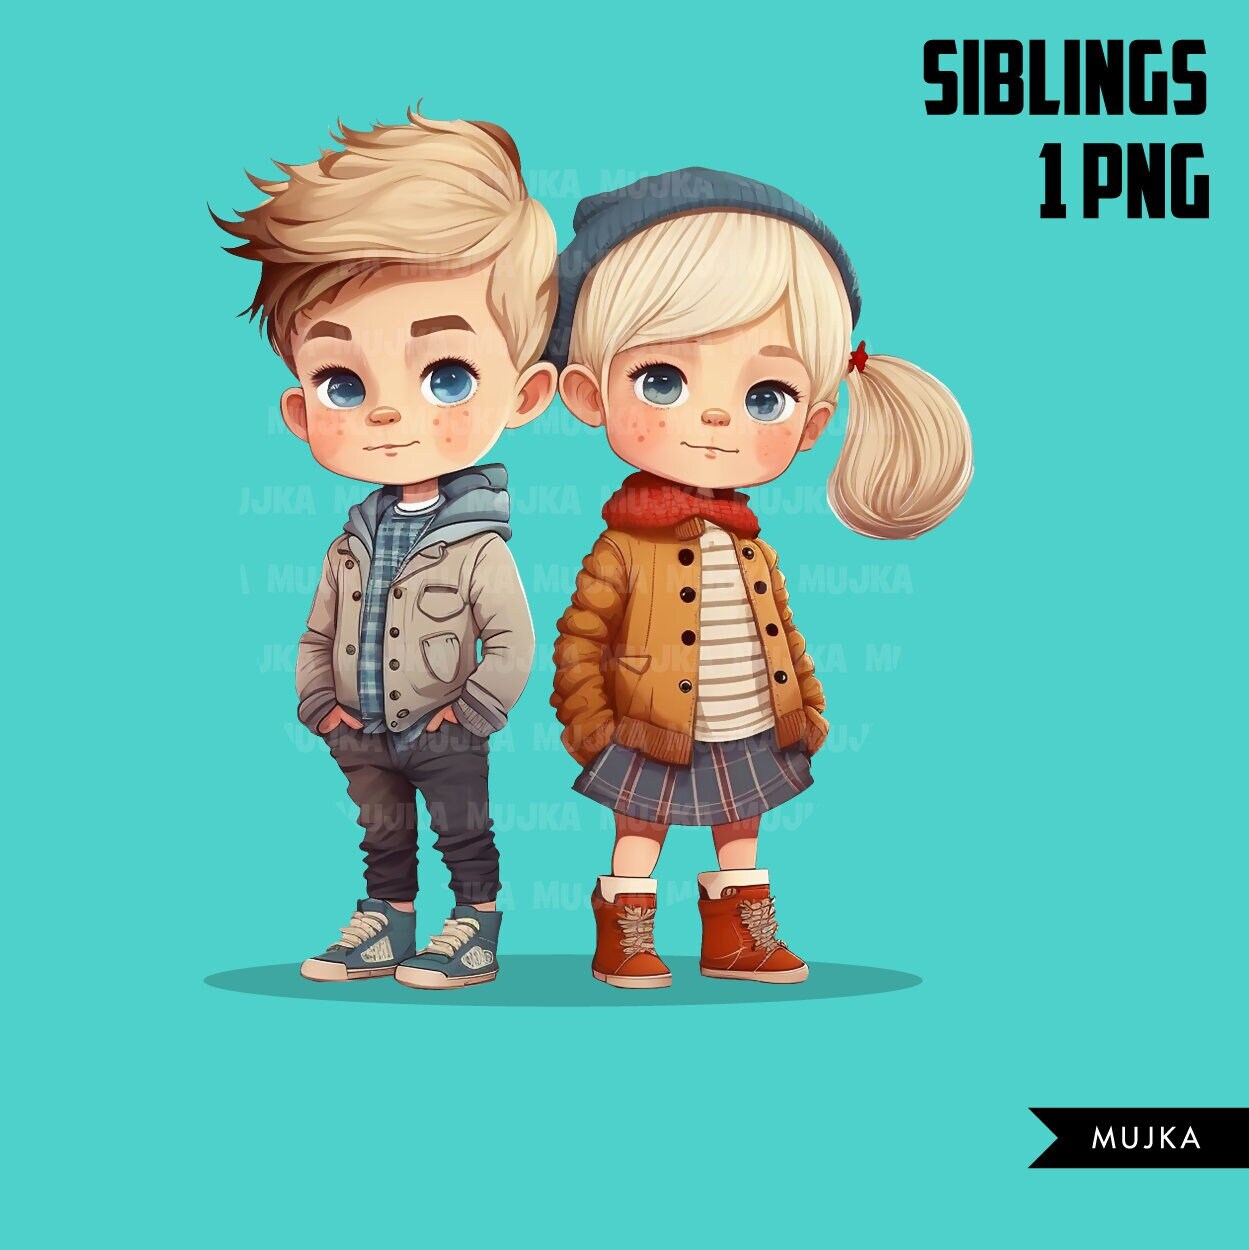 Siblings art, siblings png, friends png, family png, Boy and Girl clipart, valentine, twins png, twins clipart, blonde kids art, cool kids